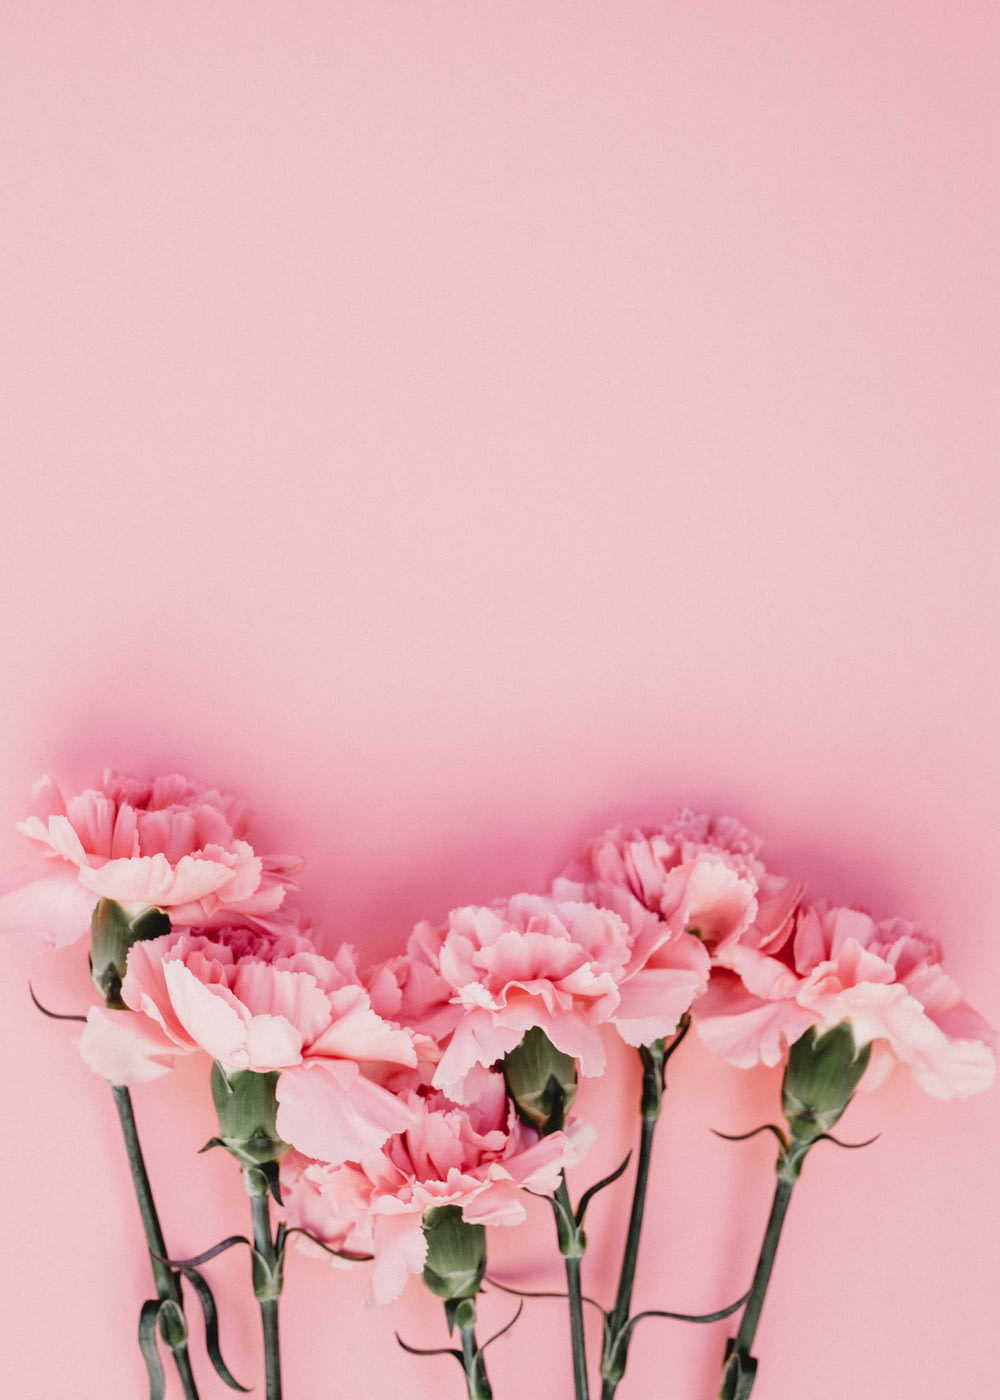 Pink flowers with pink background.